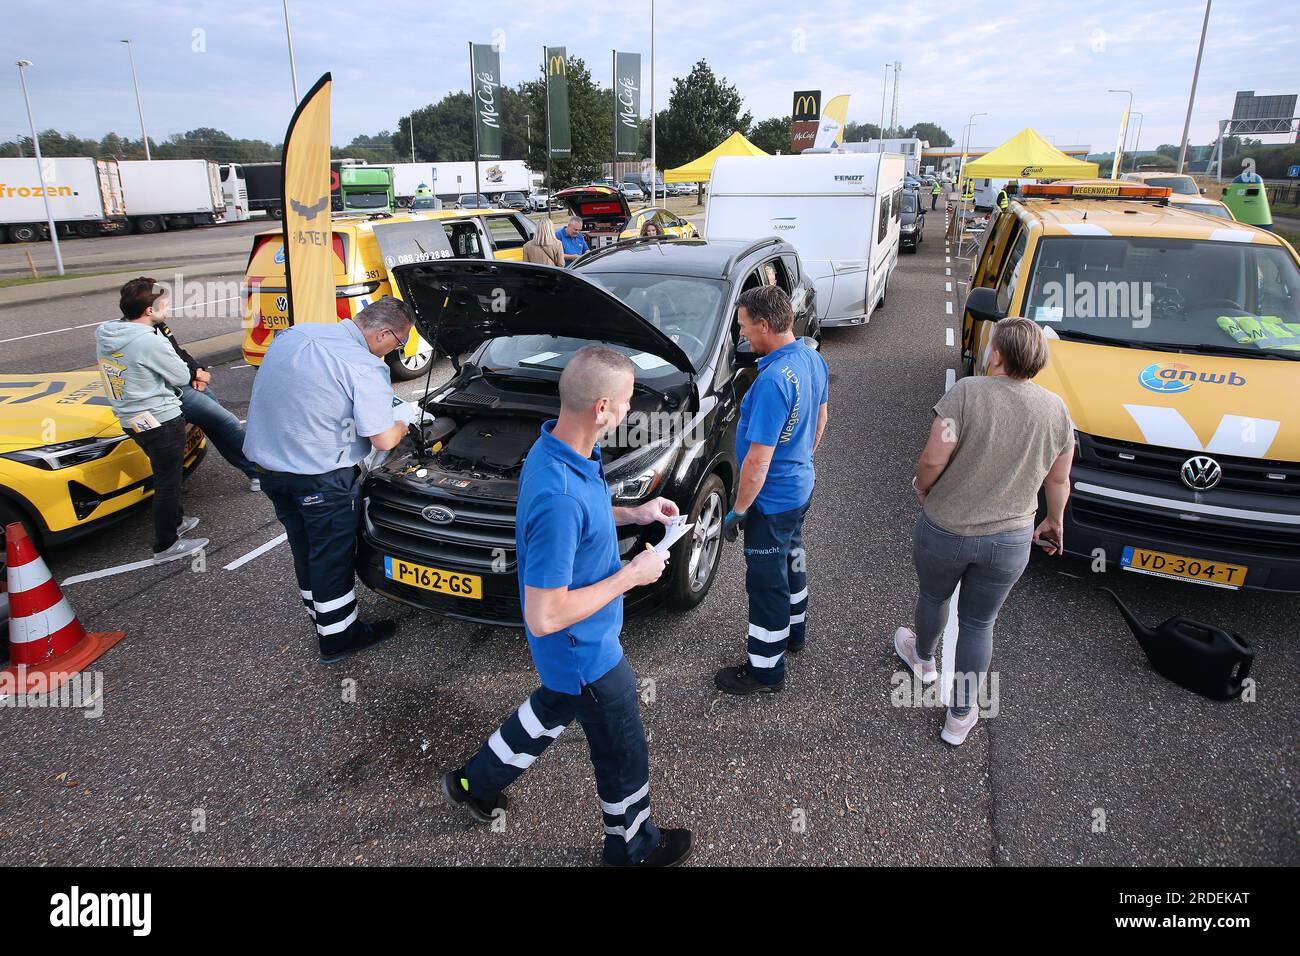 HAZELDONK - Holidaymakers have their vehicle checked at the border crossing with Belgium for a final ANWB holiday check of the car, caravan or folding trailer. ANP RAMON MANGOLD netherlands out - belgium out Stock Photo